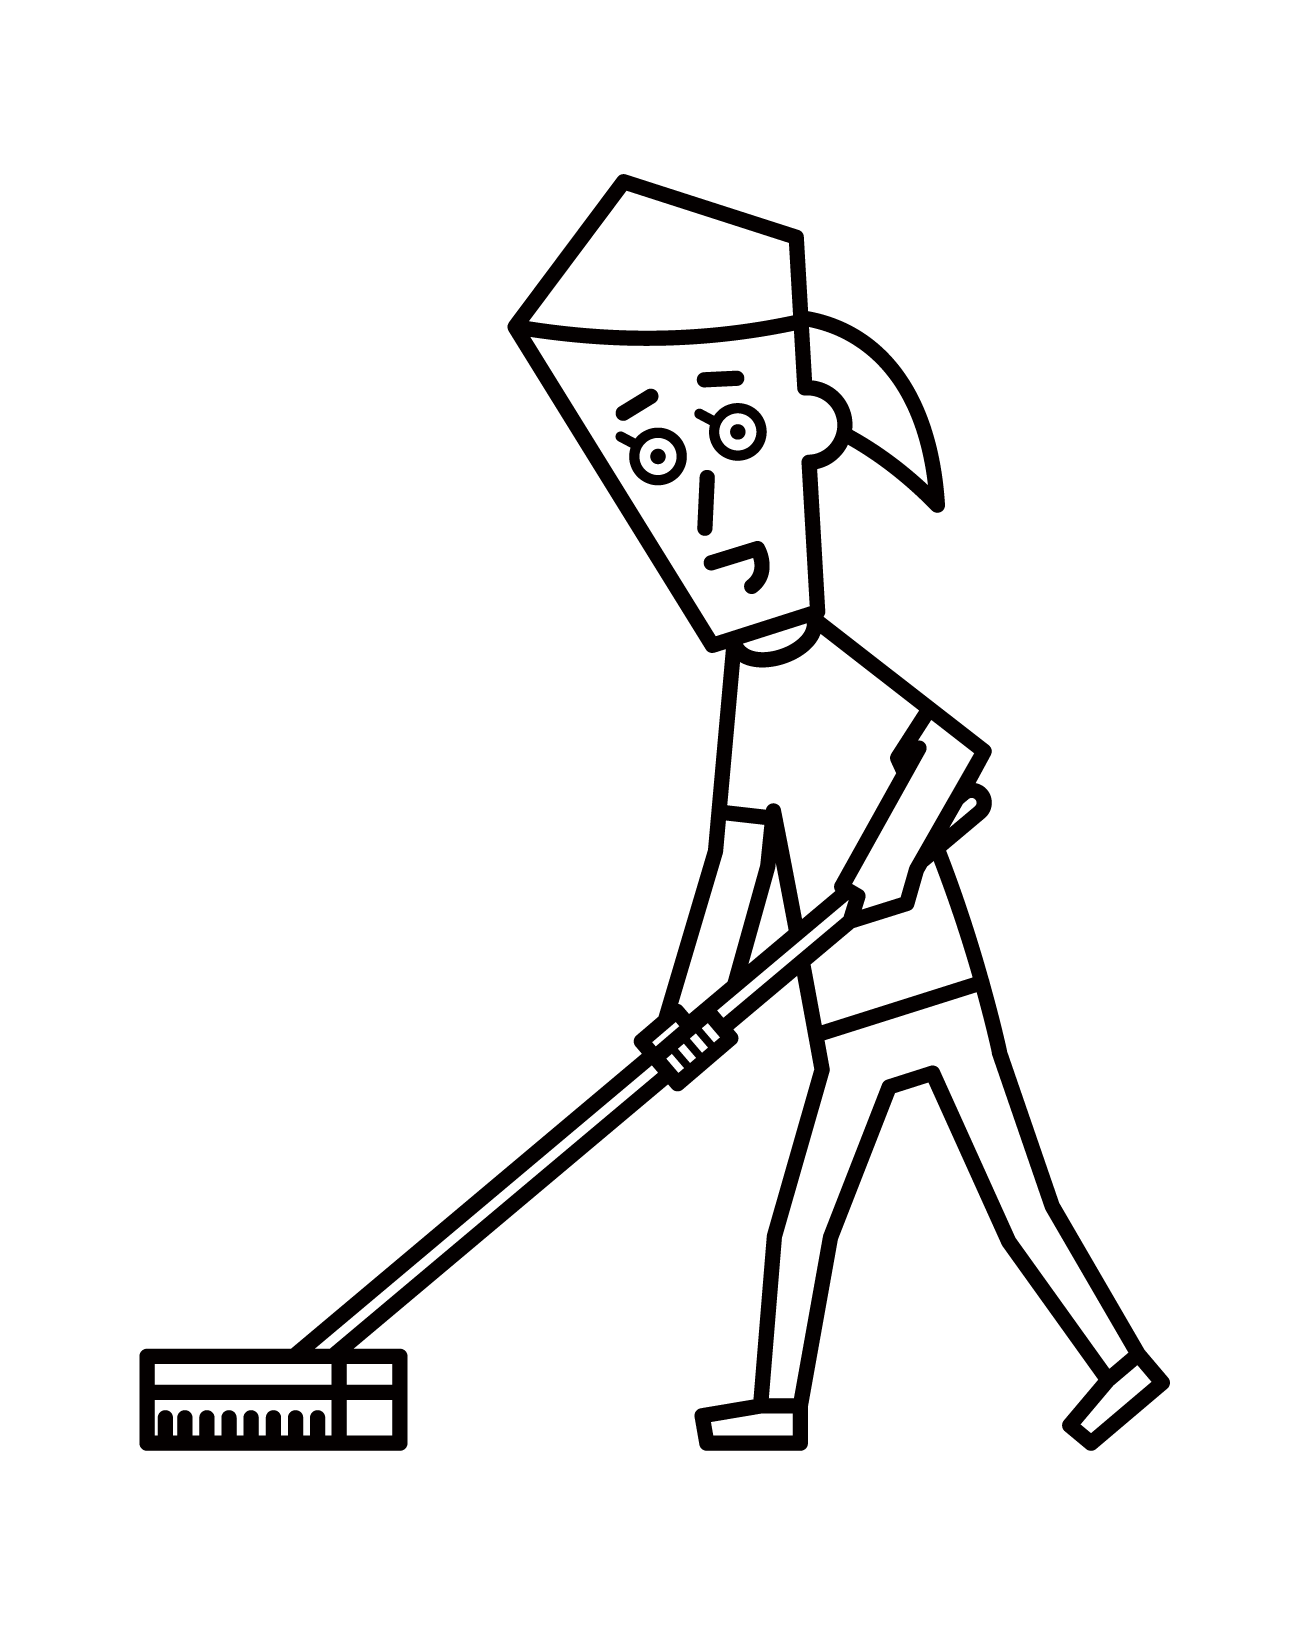 Illustration of a woman cleaning with a brush